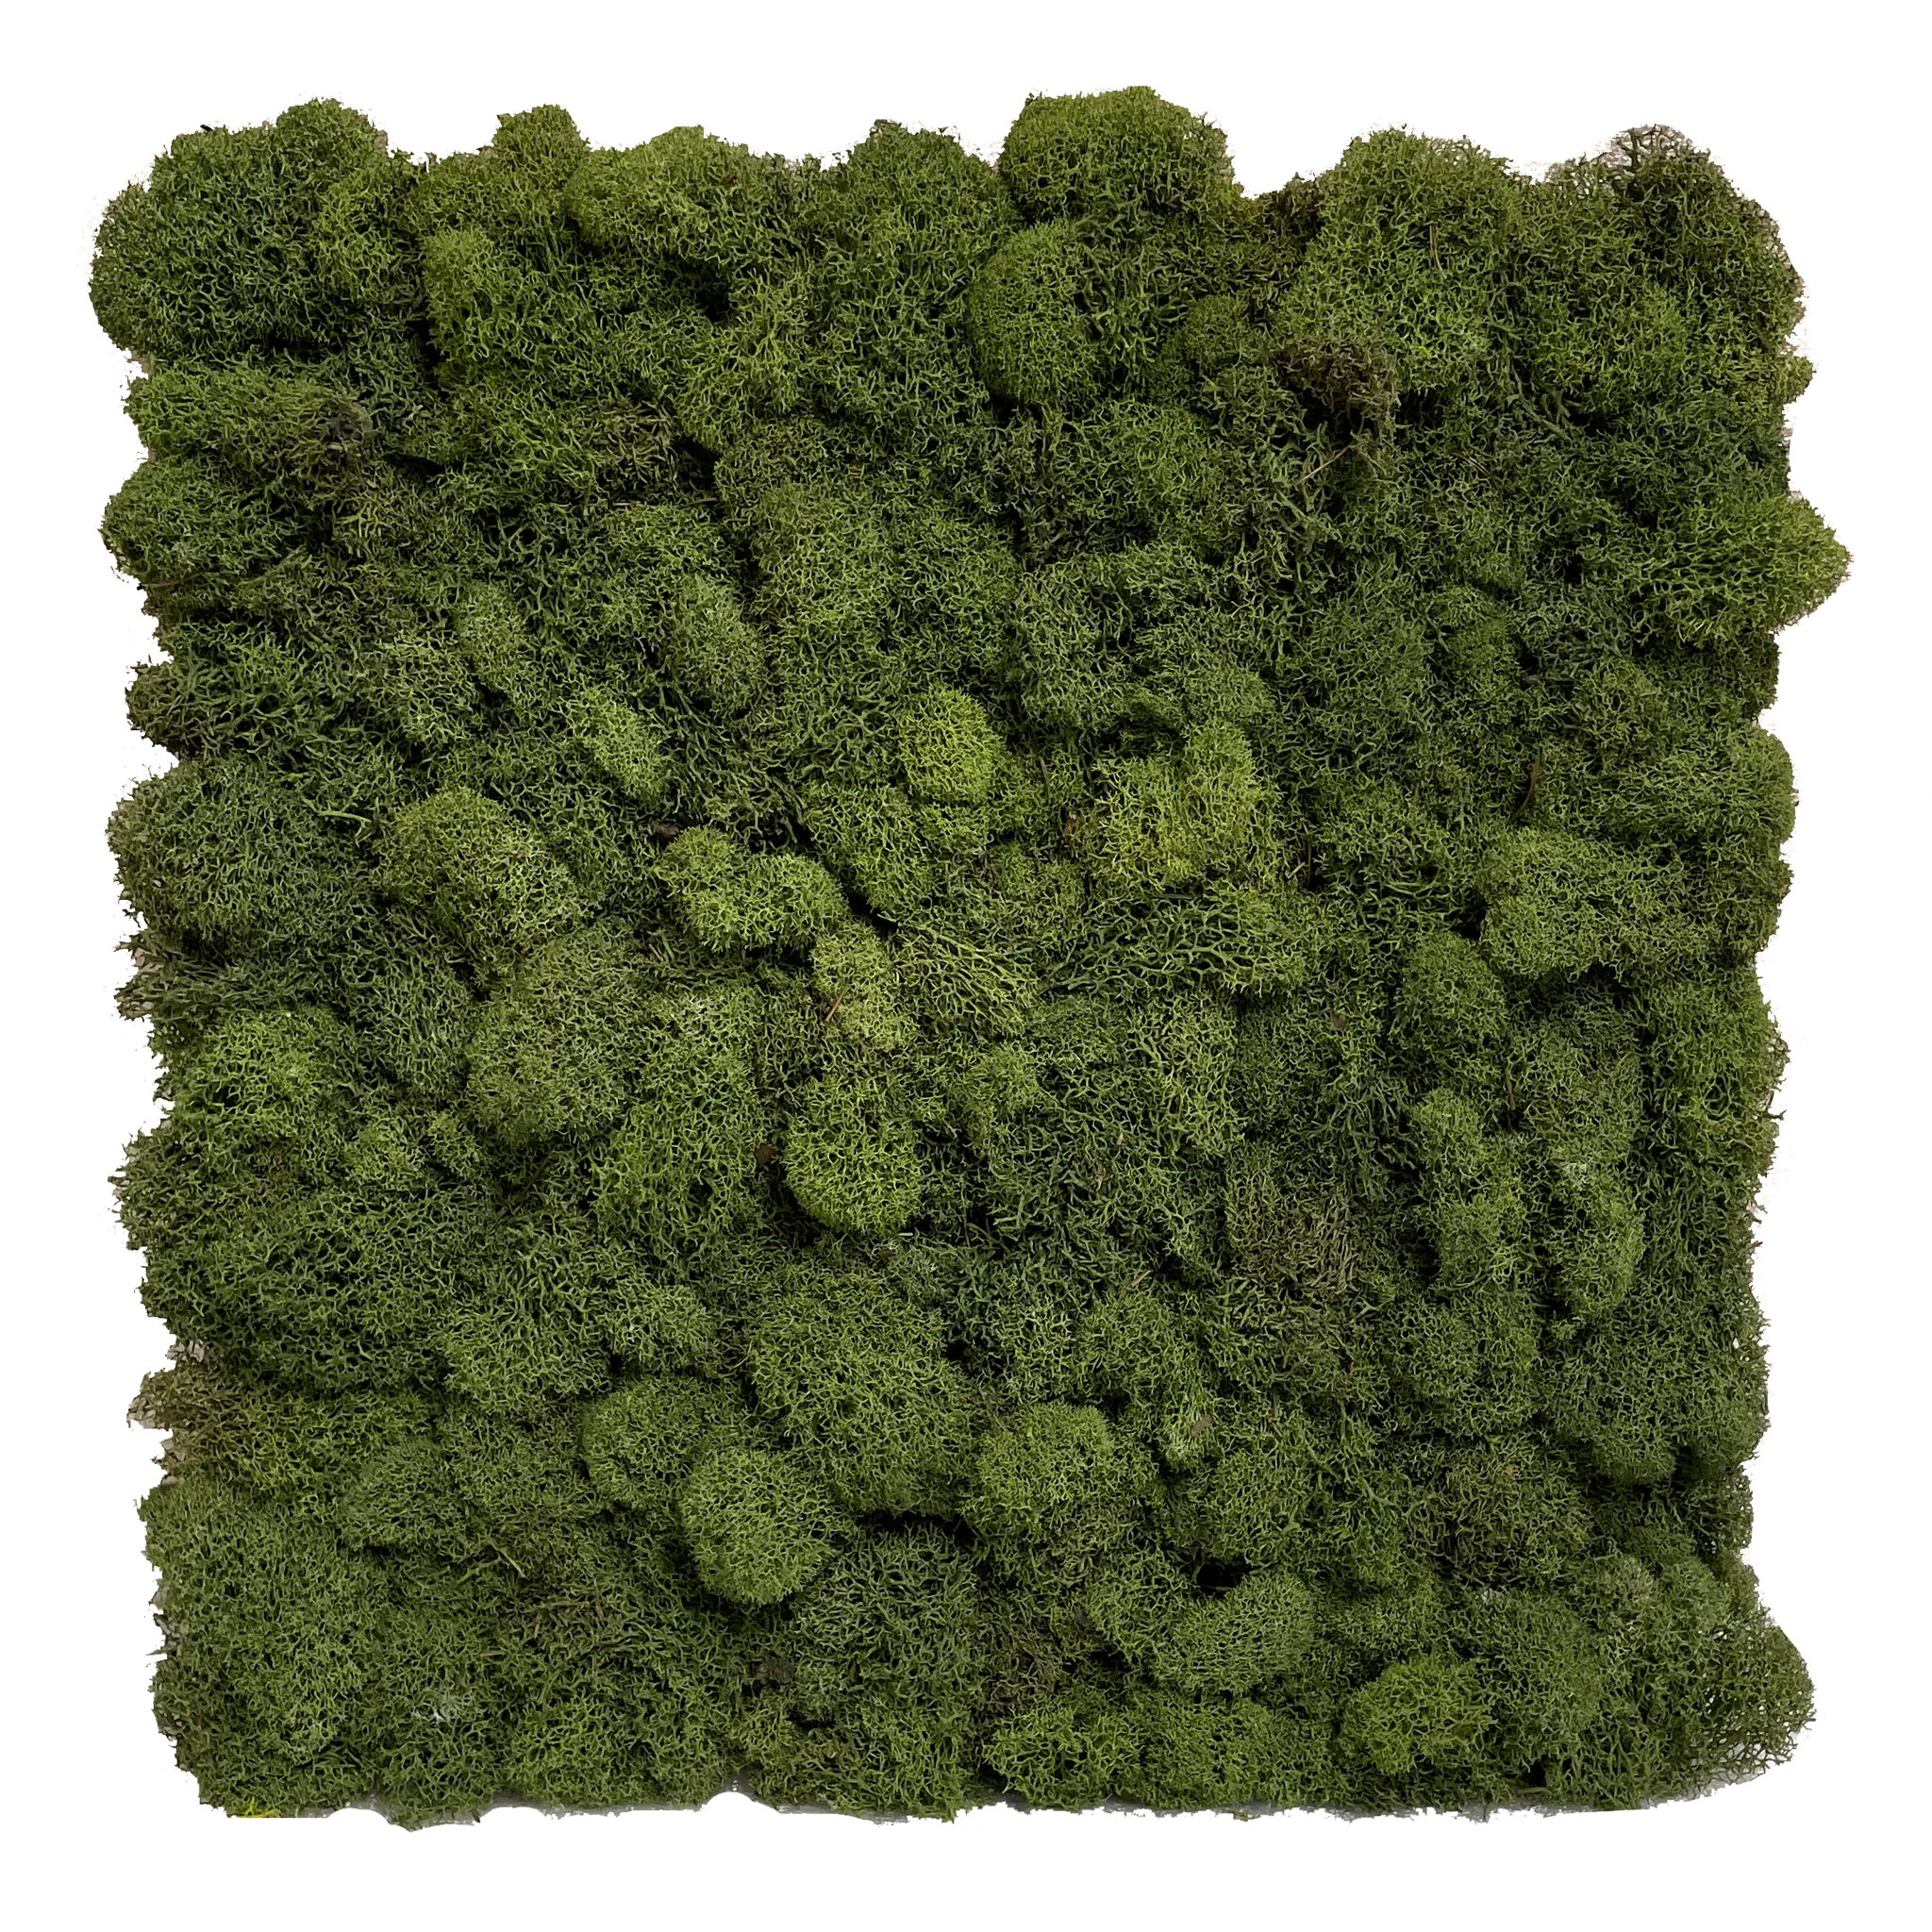 Patterns in Nature Preserved Moss Wall - 100% Real and Maintenance-free  Moss Wall